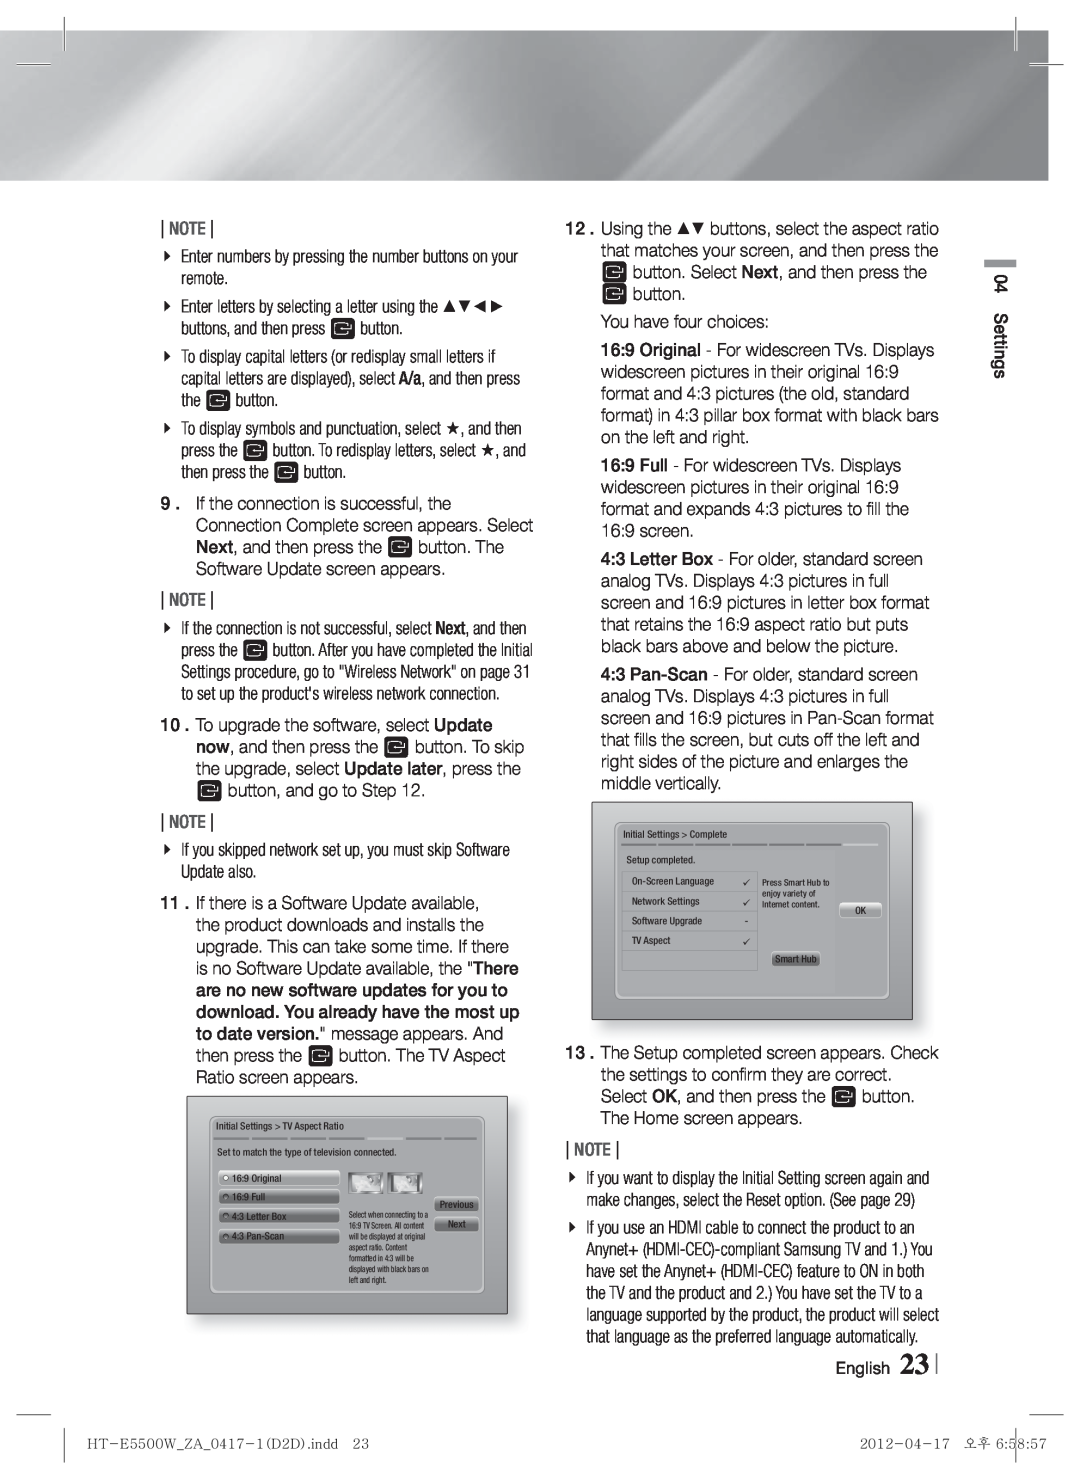 Samsung HT-E550 user manual Note, Ebutton You have four choices 